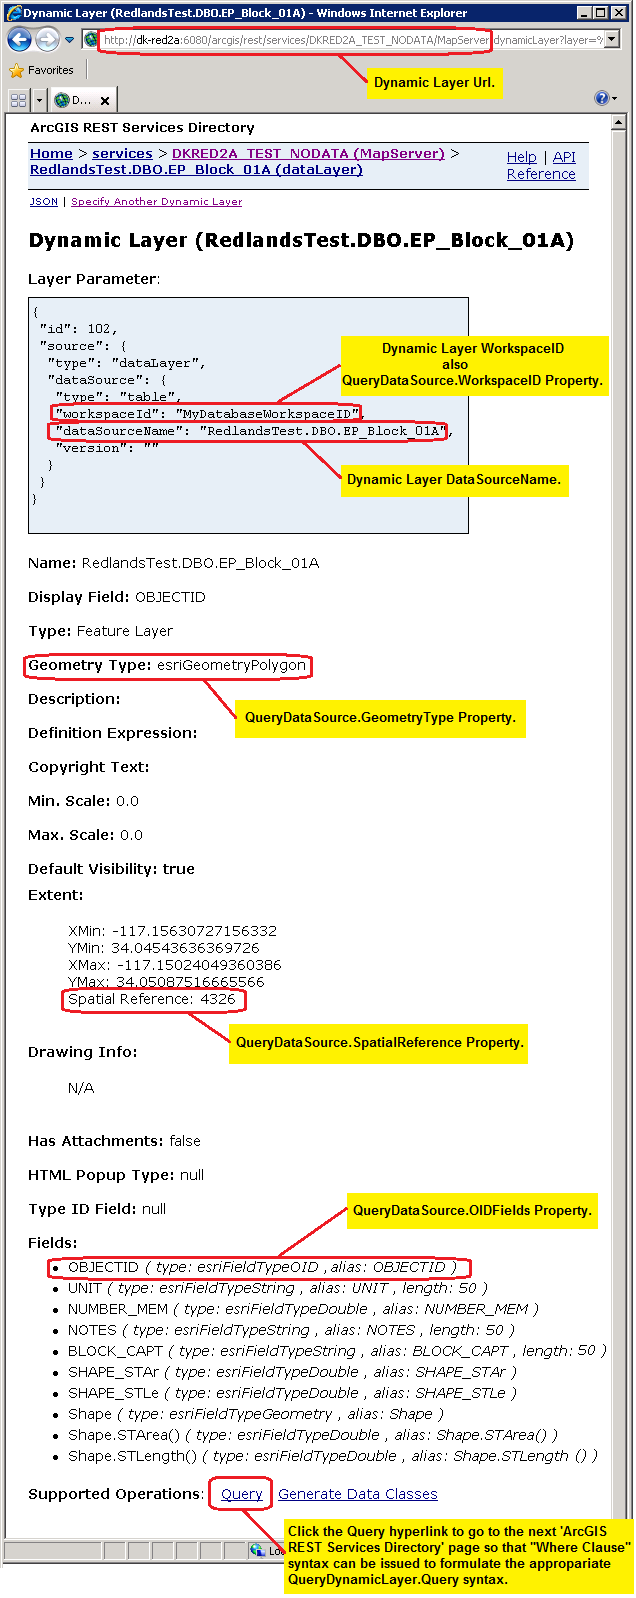 The 'Obtaining the QueryDataSource Parameter information from the 'ArcGIS REST Services Directory' pages.